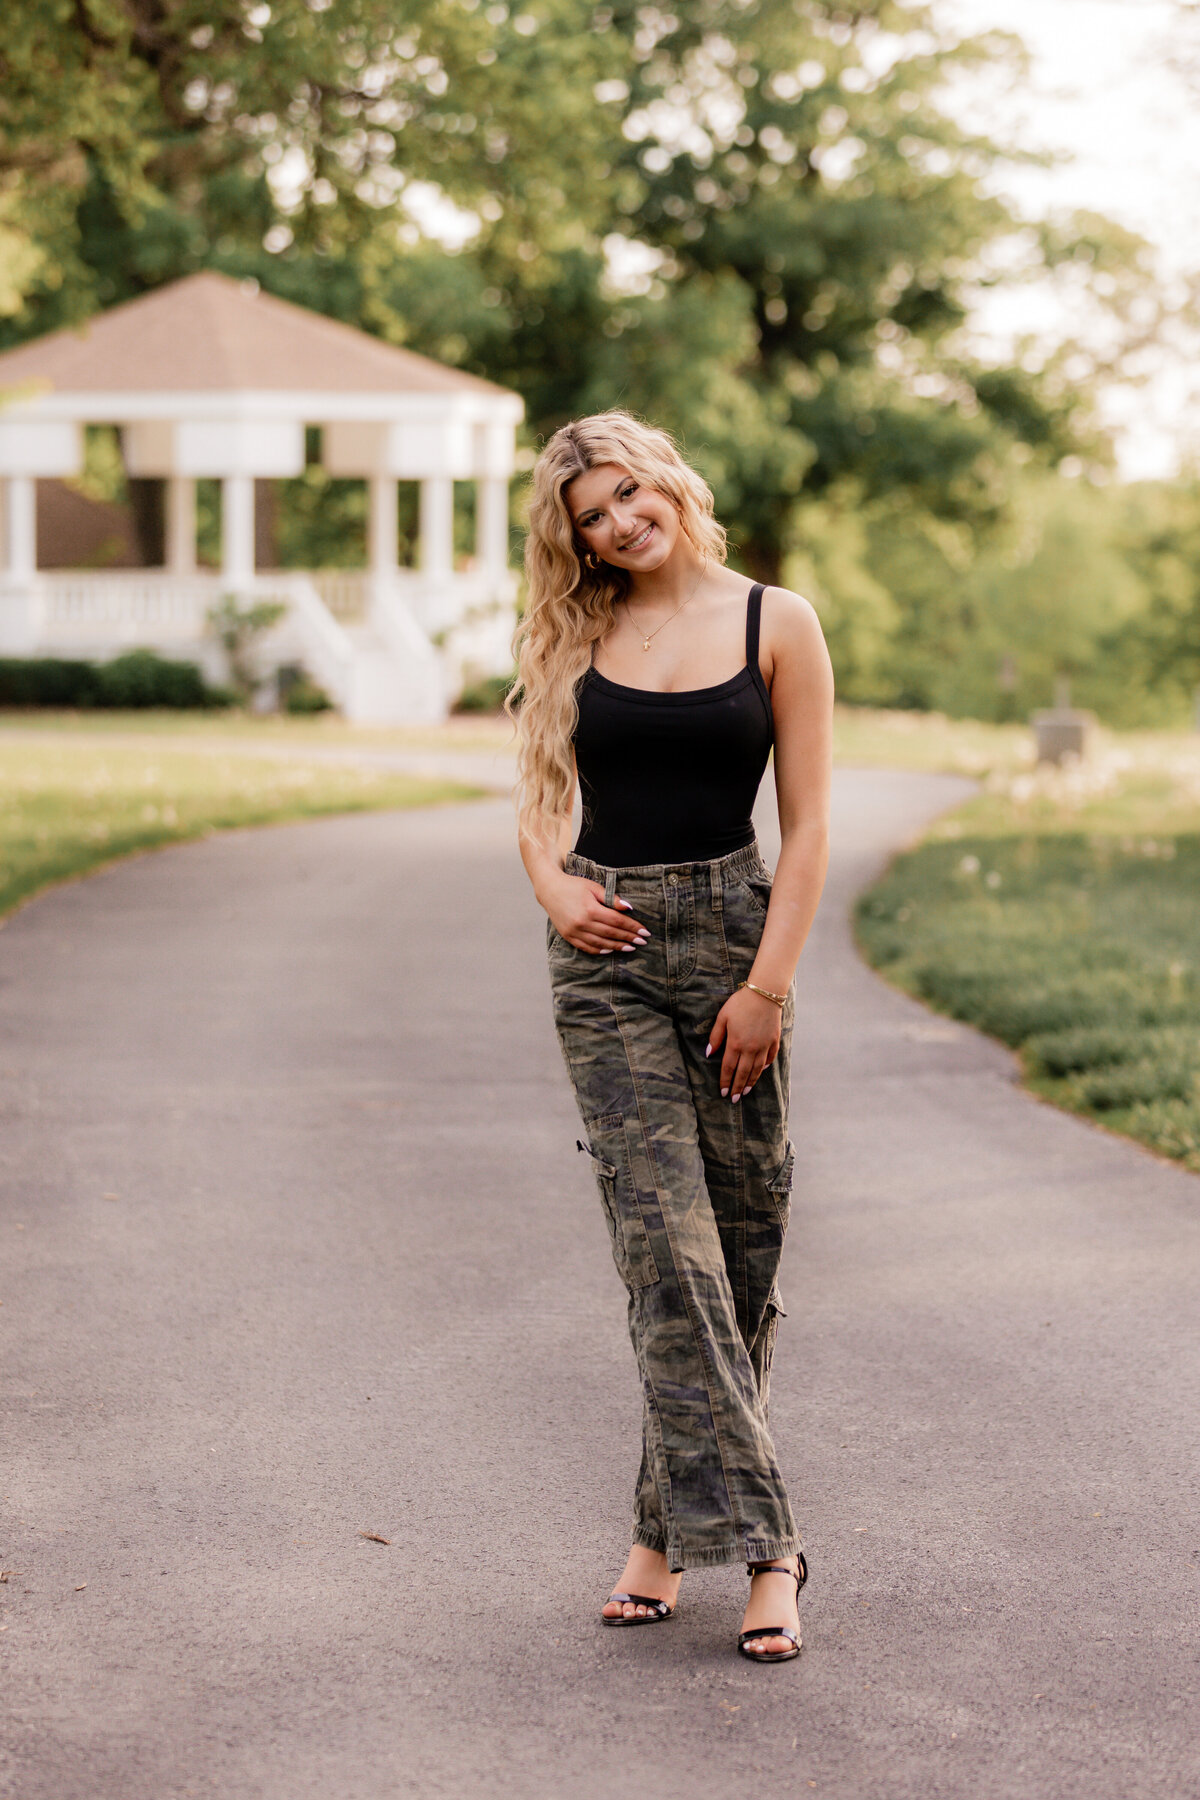 A teen blonde in camoflauge pants poses on a path in front of a gazebo